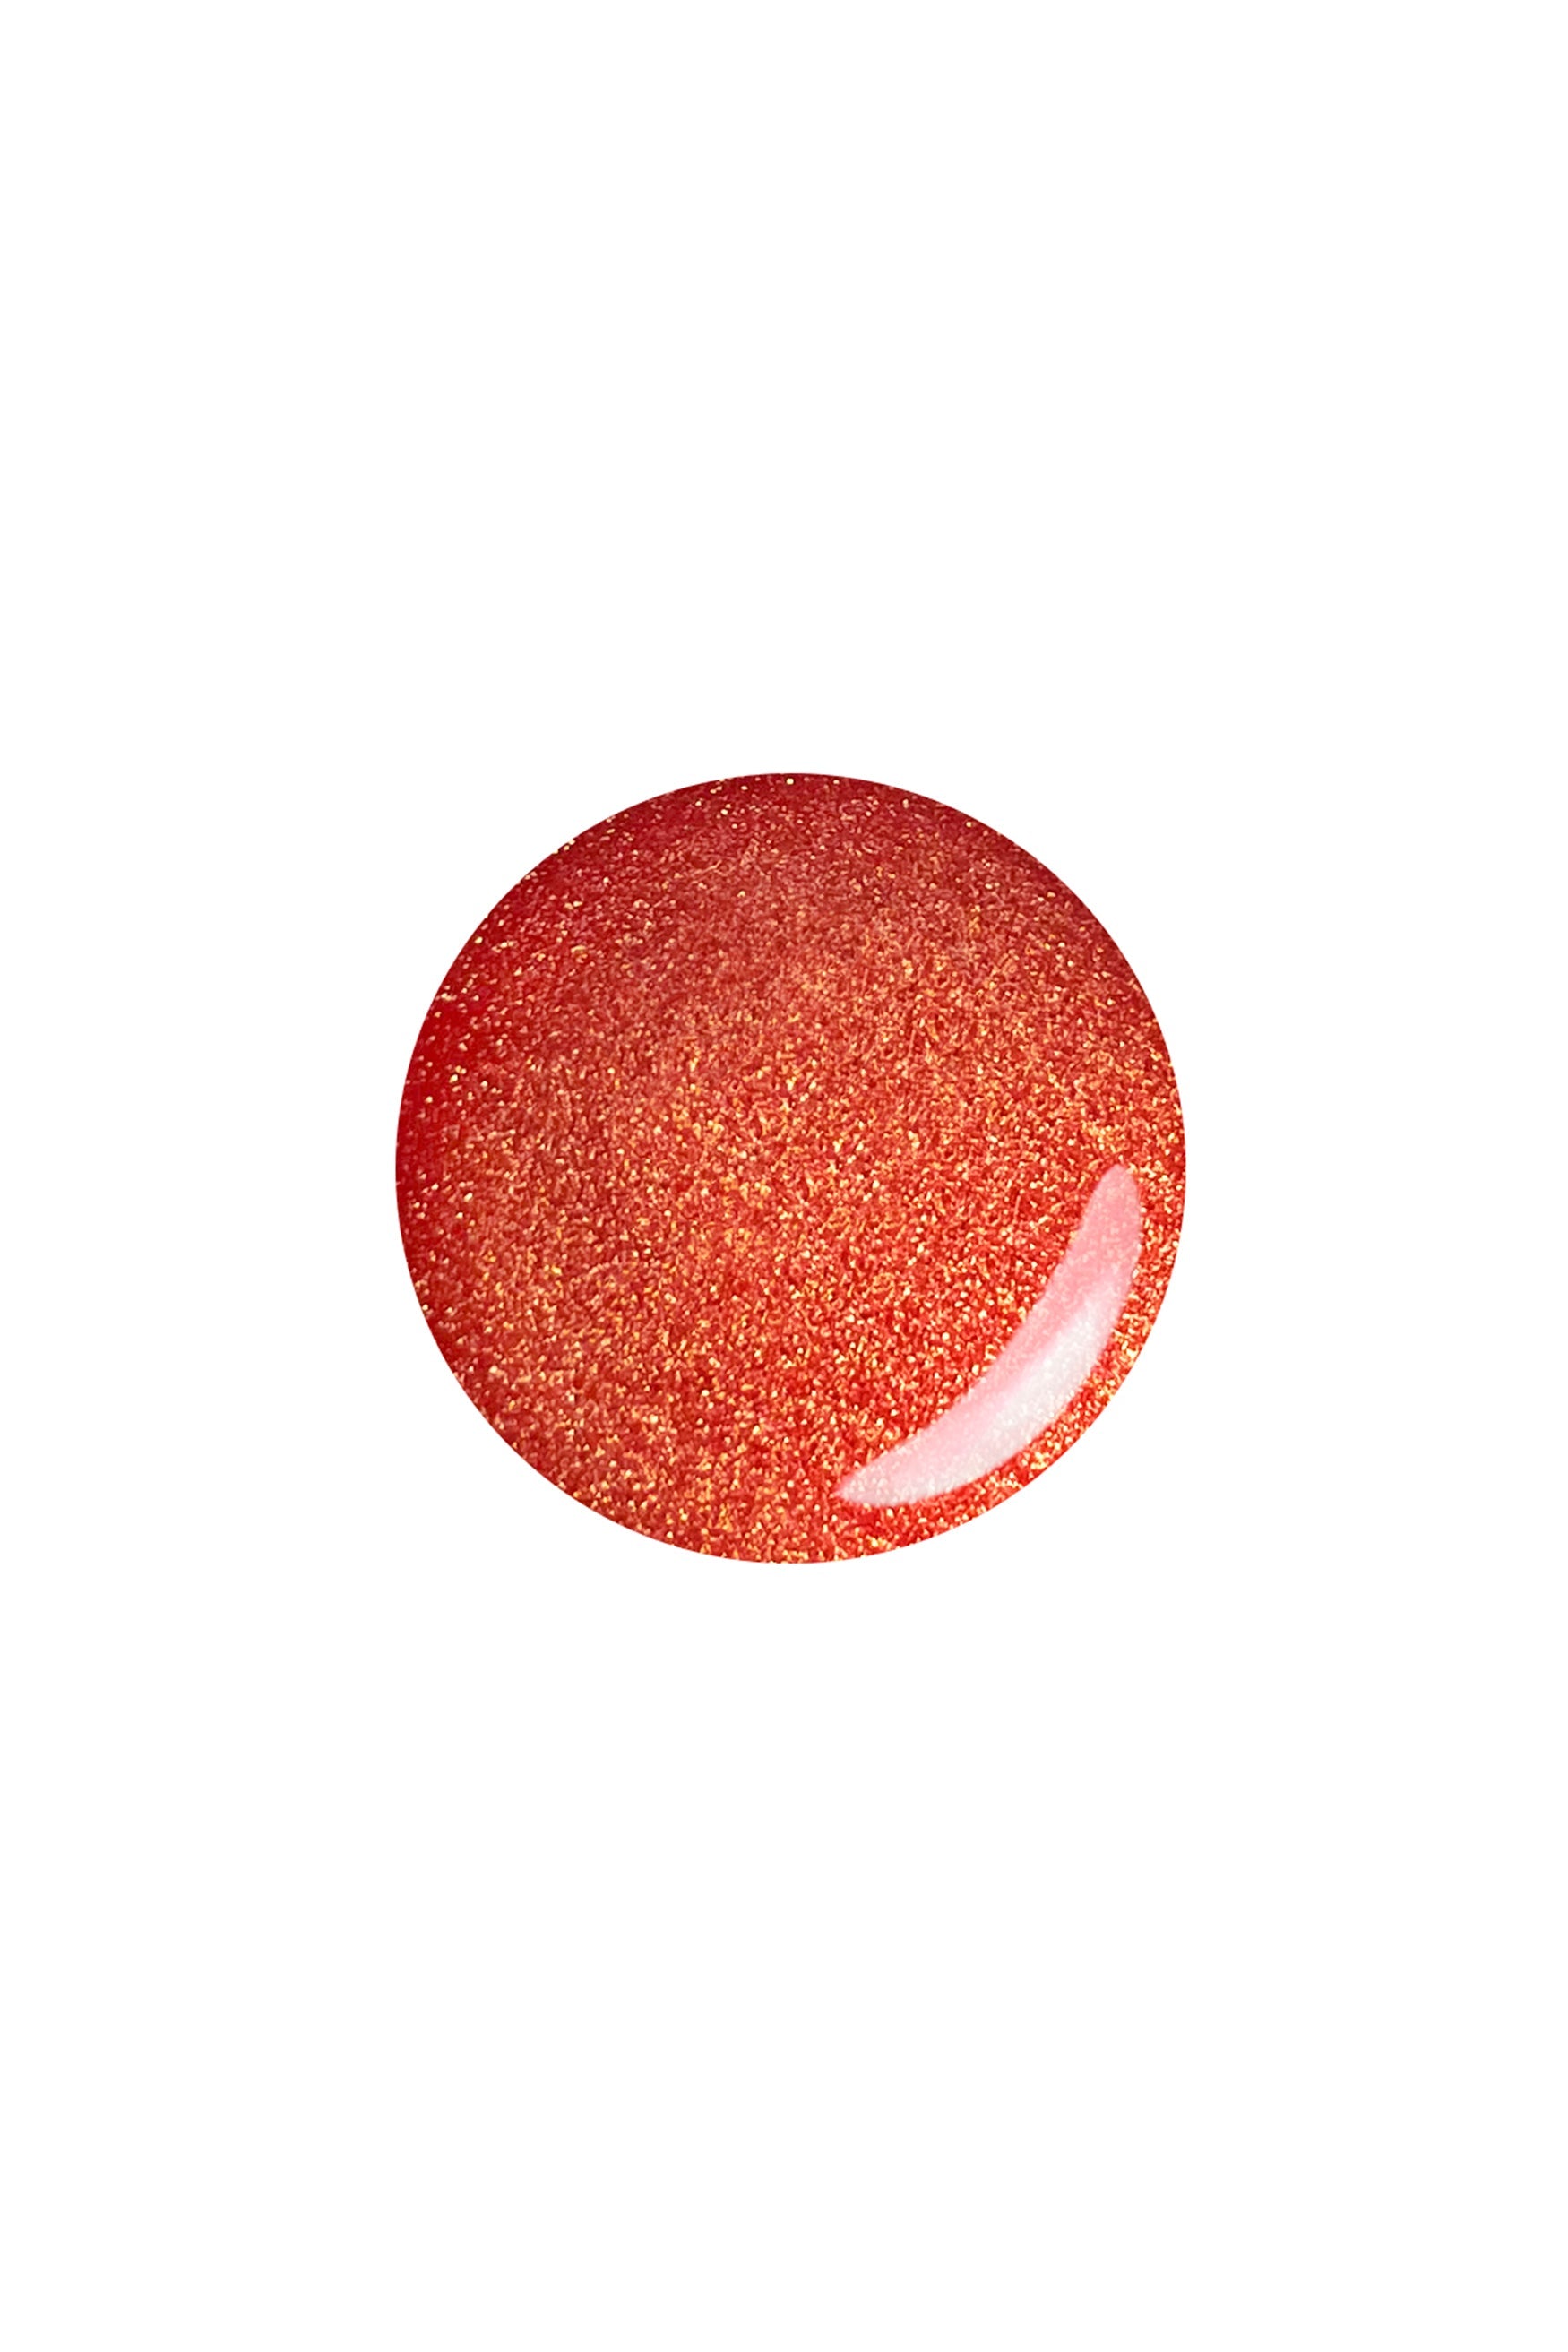 The transparent oil formula provides a clear, VIBRANT ORANGE. Formulated with highly reflective glitter and high viscosity oil